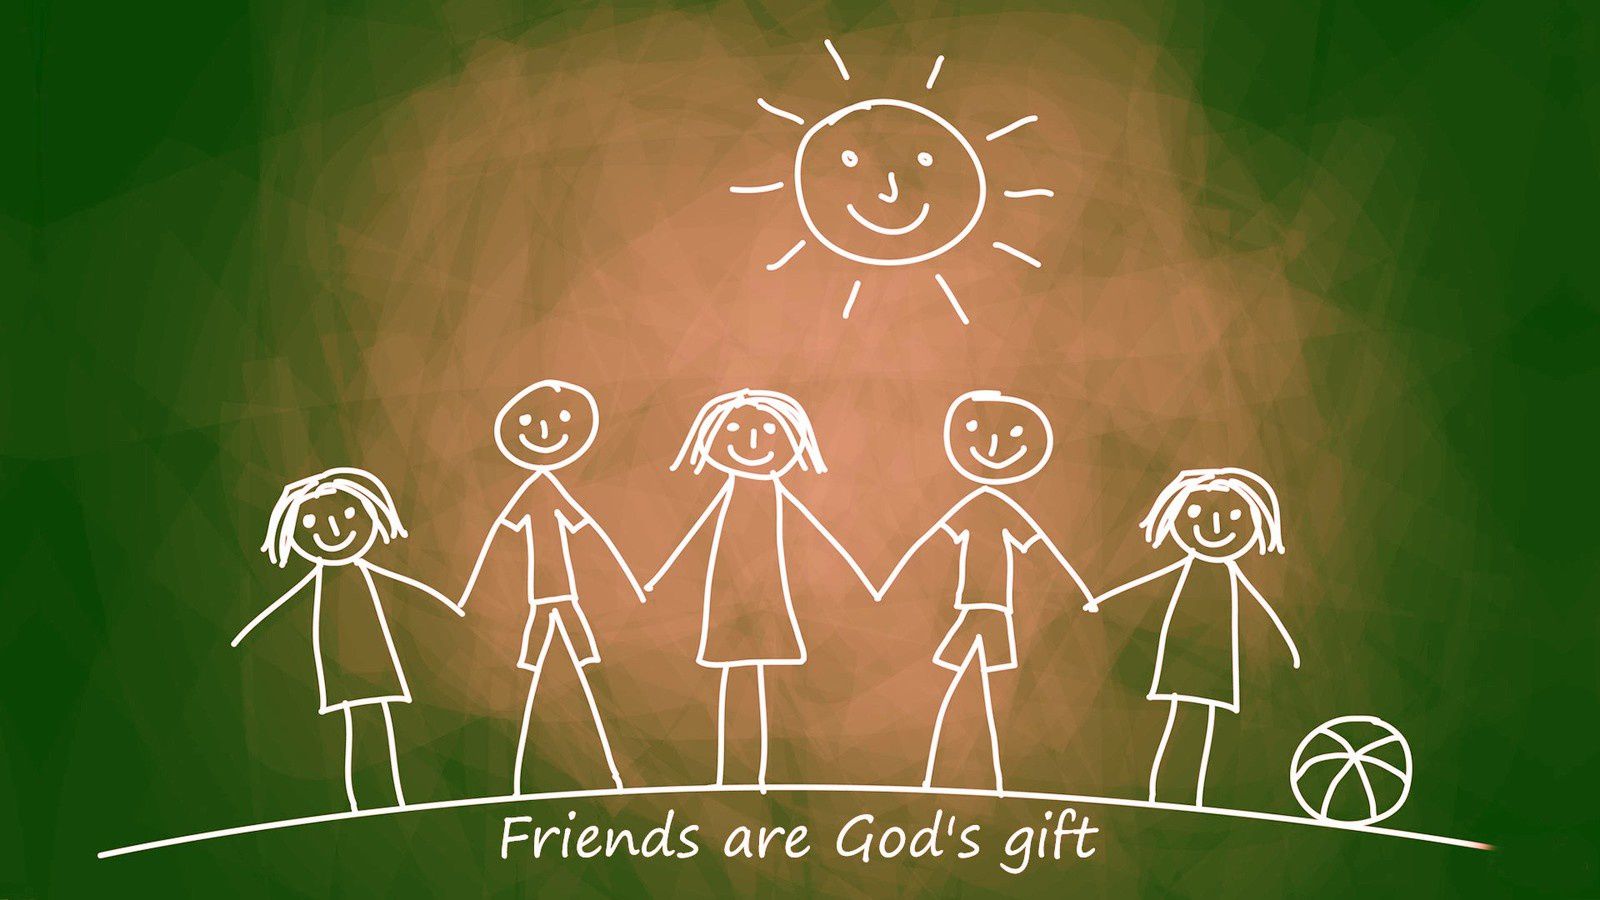 Friends are God's gift